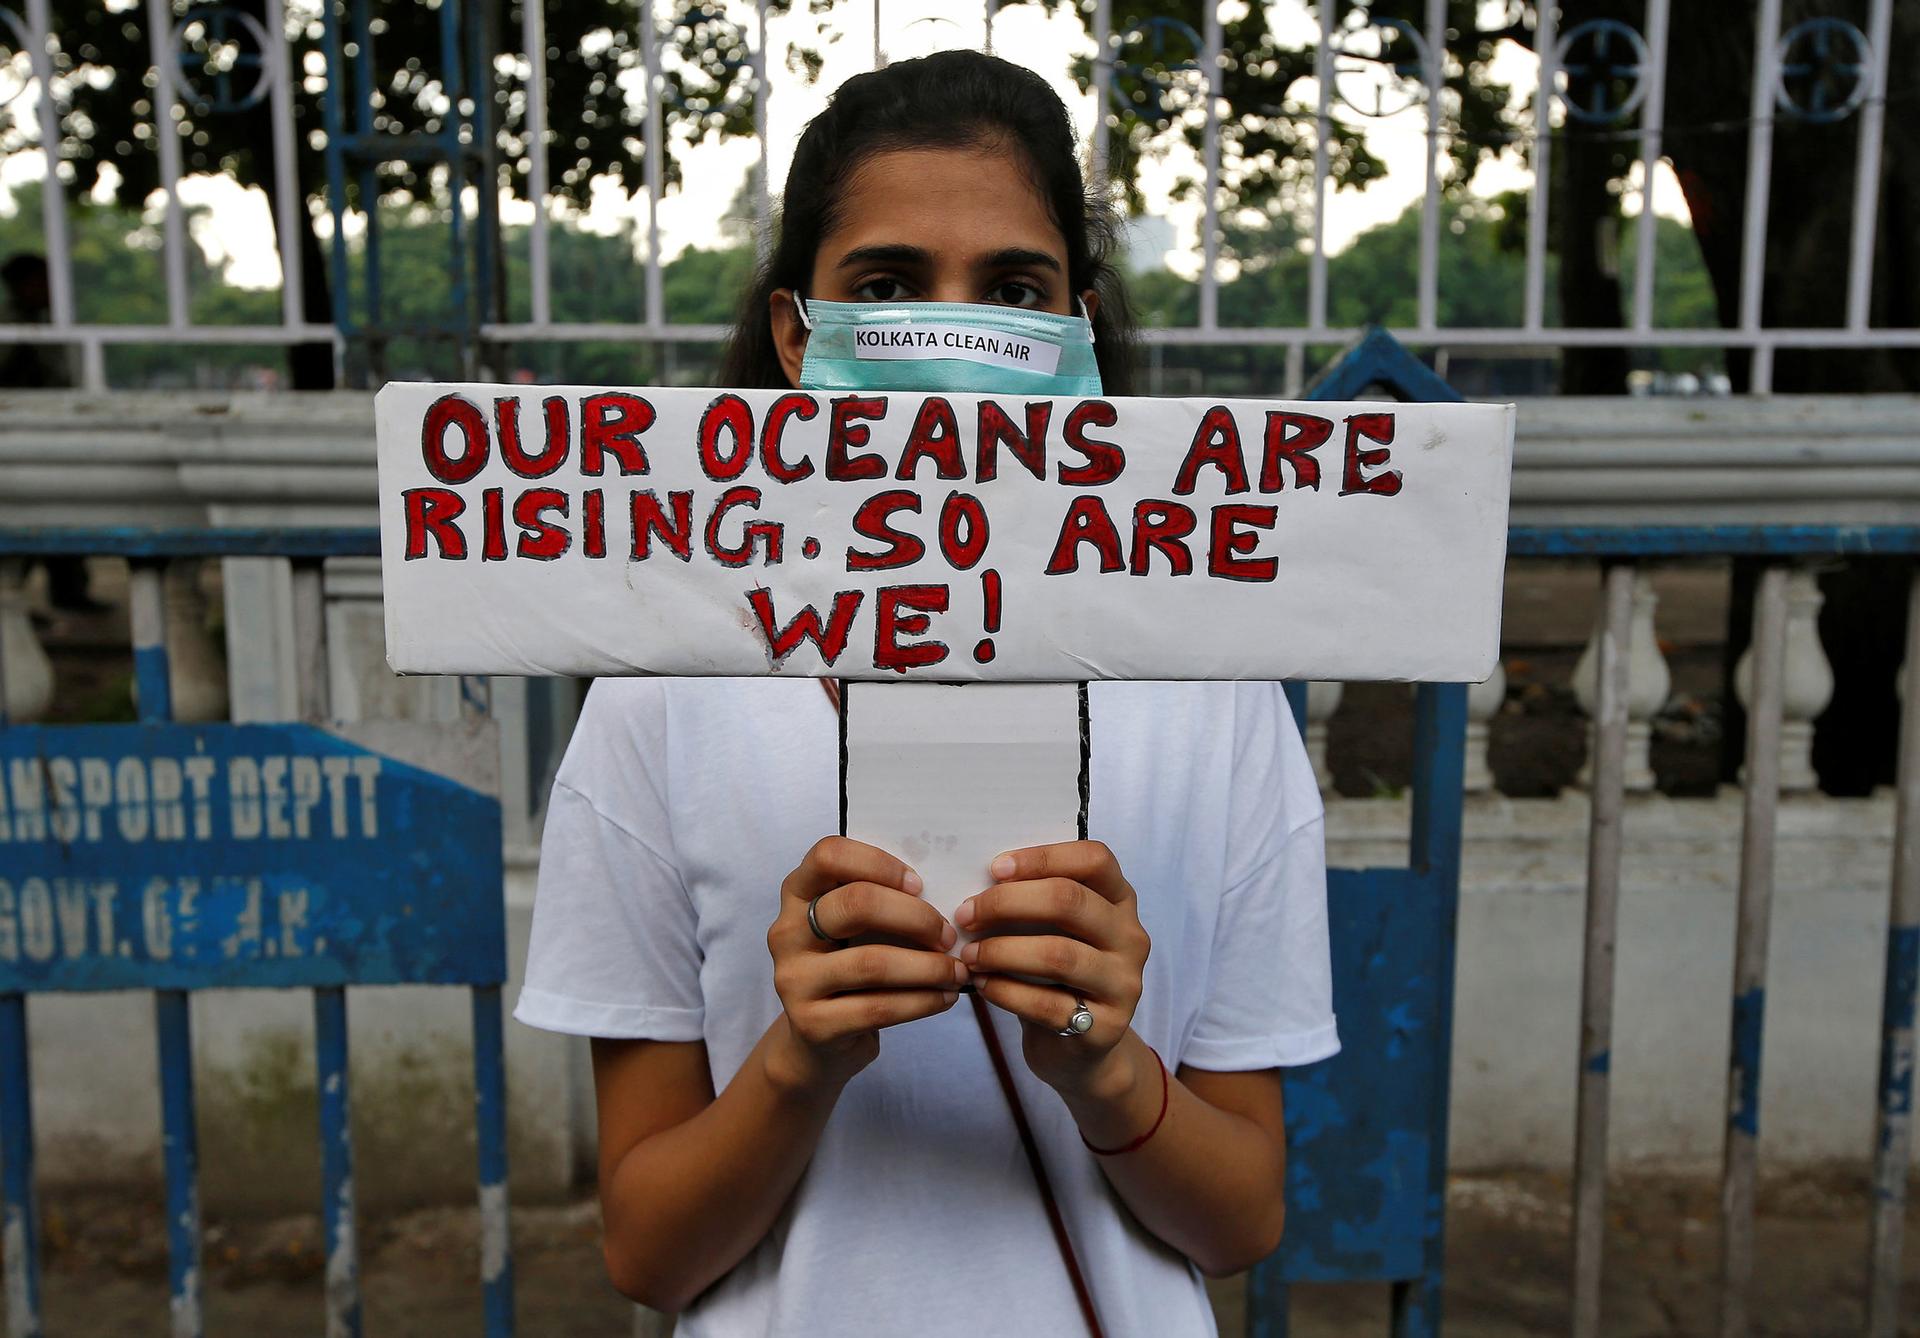 A woman is shown standing and holding a sign that reads, "Our oceans are rising. So are we!"